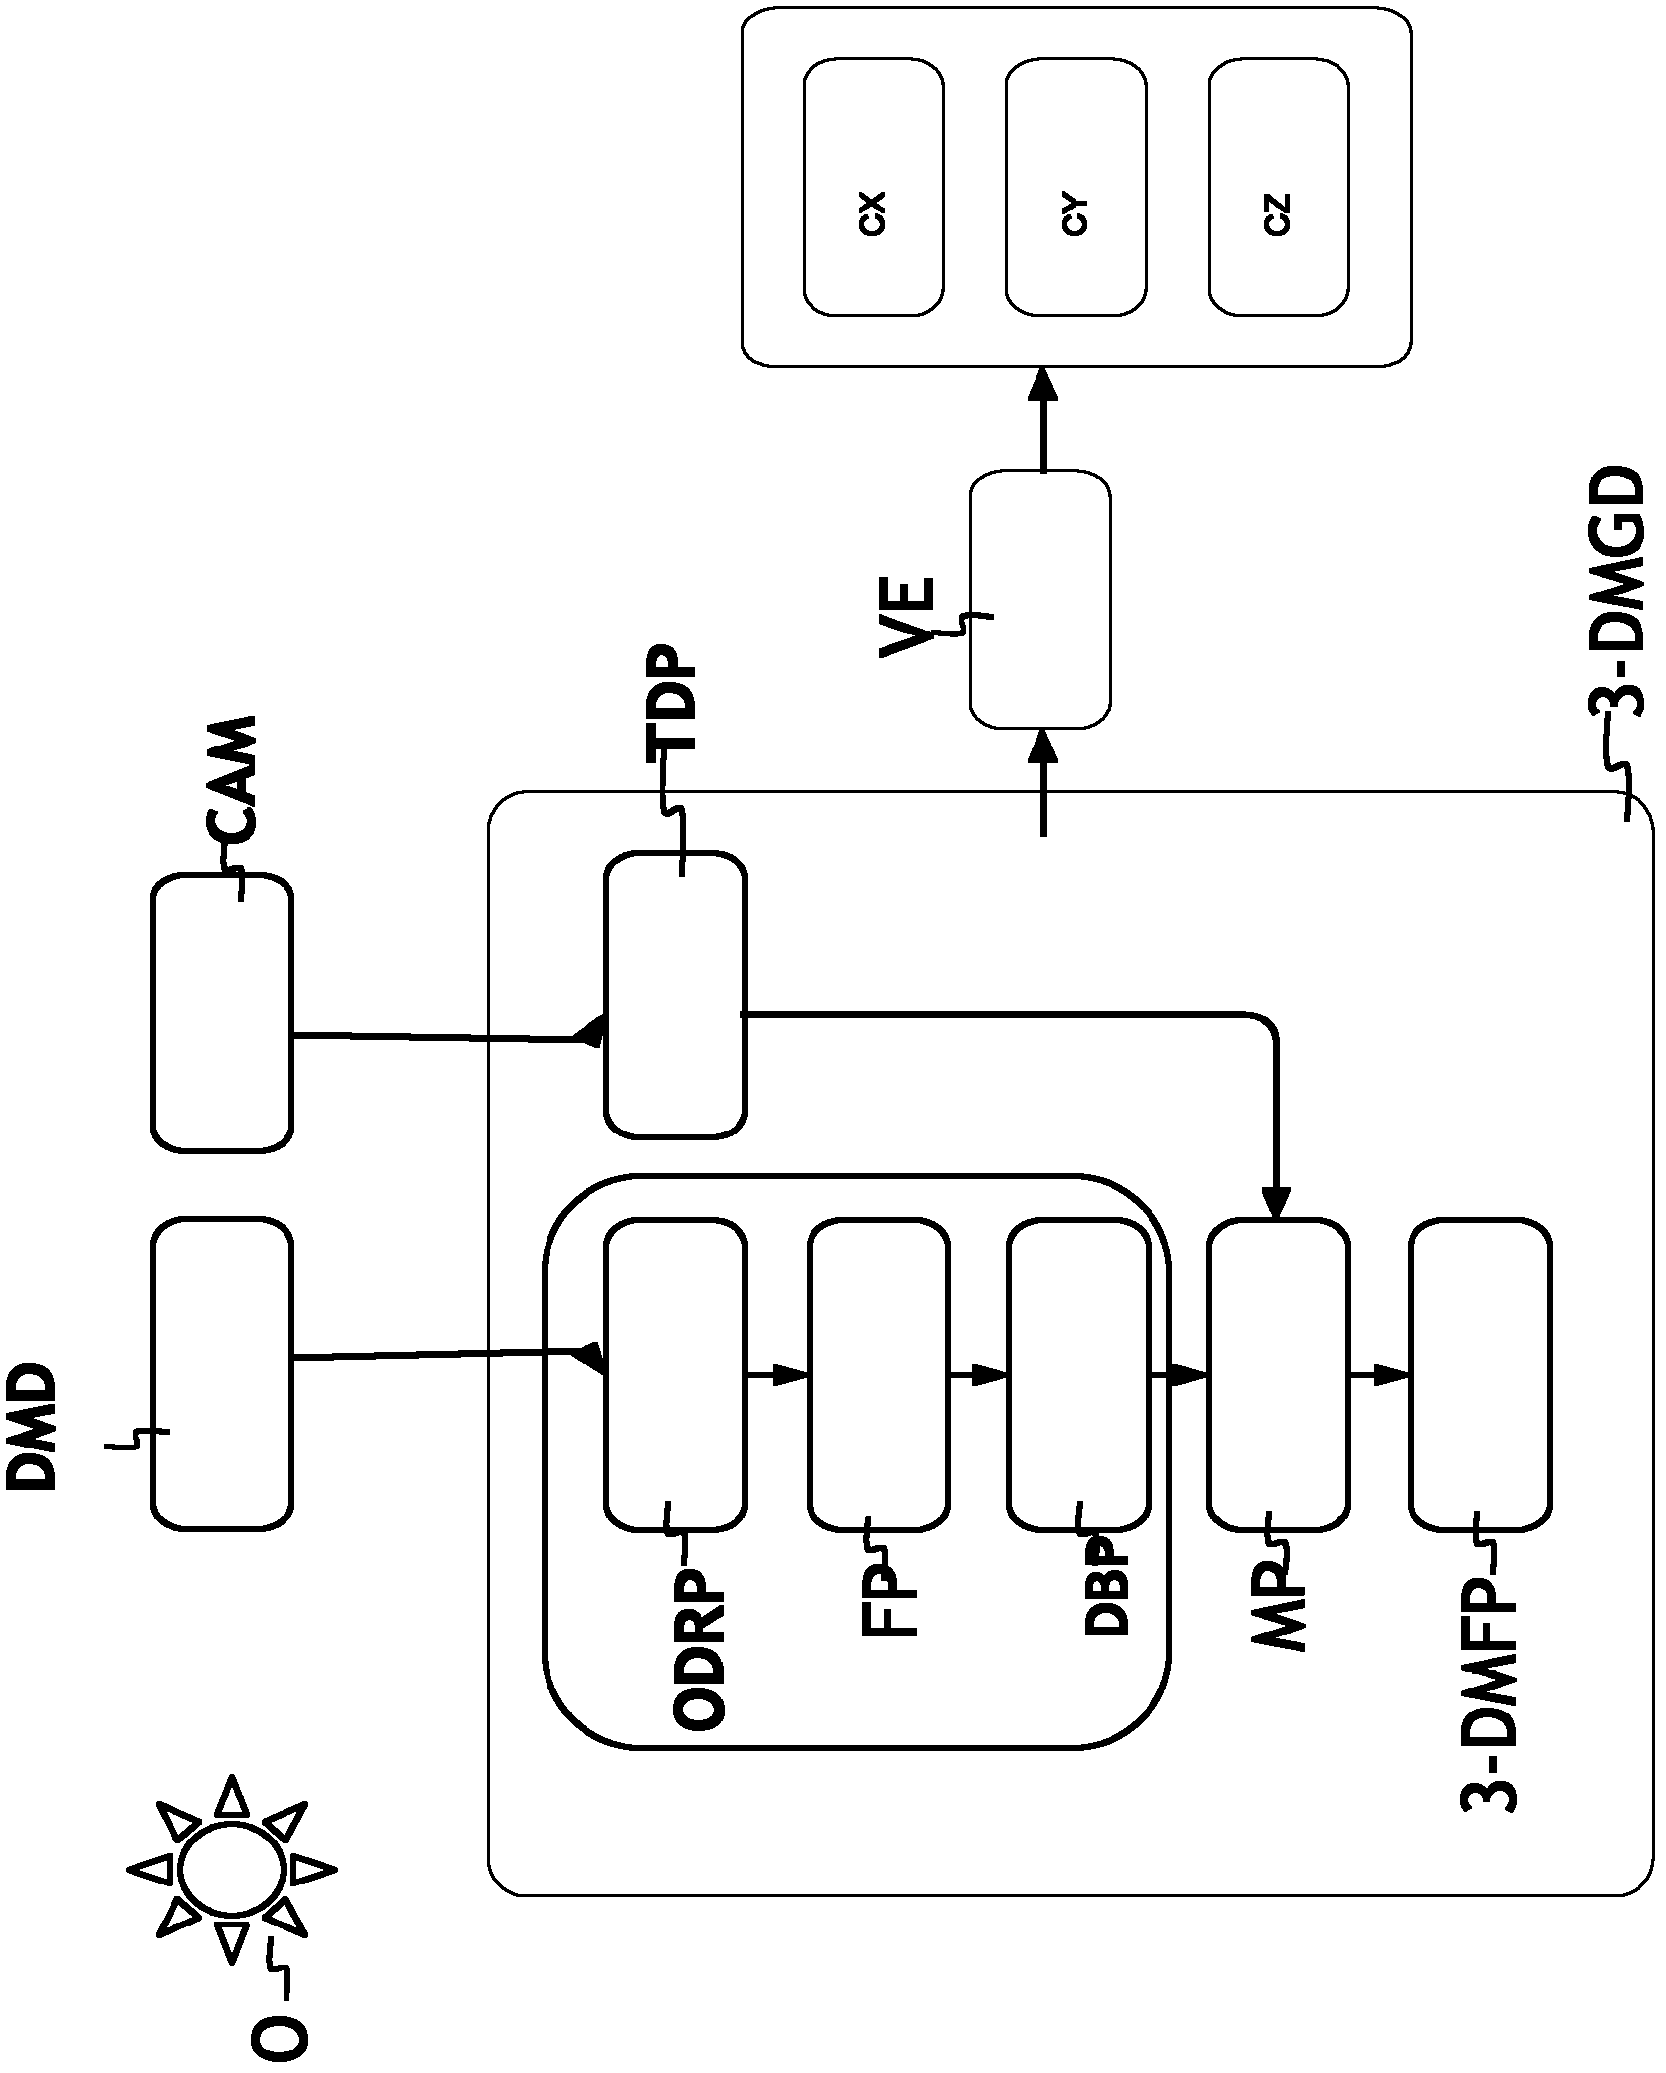 Method for generating a 3-dimensional model of an object